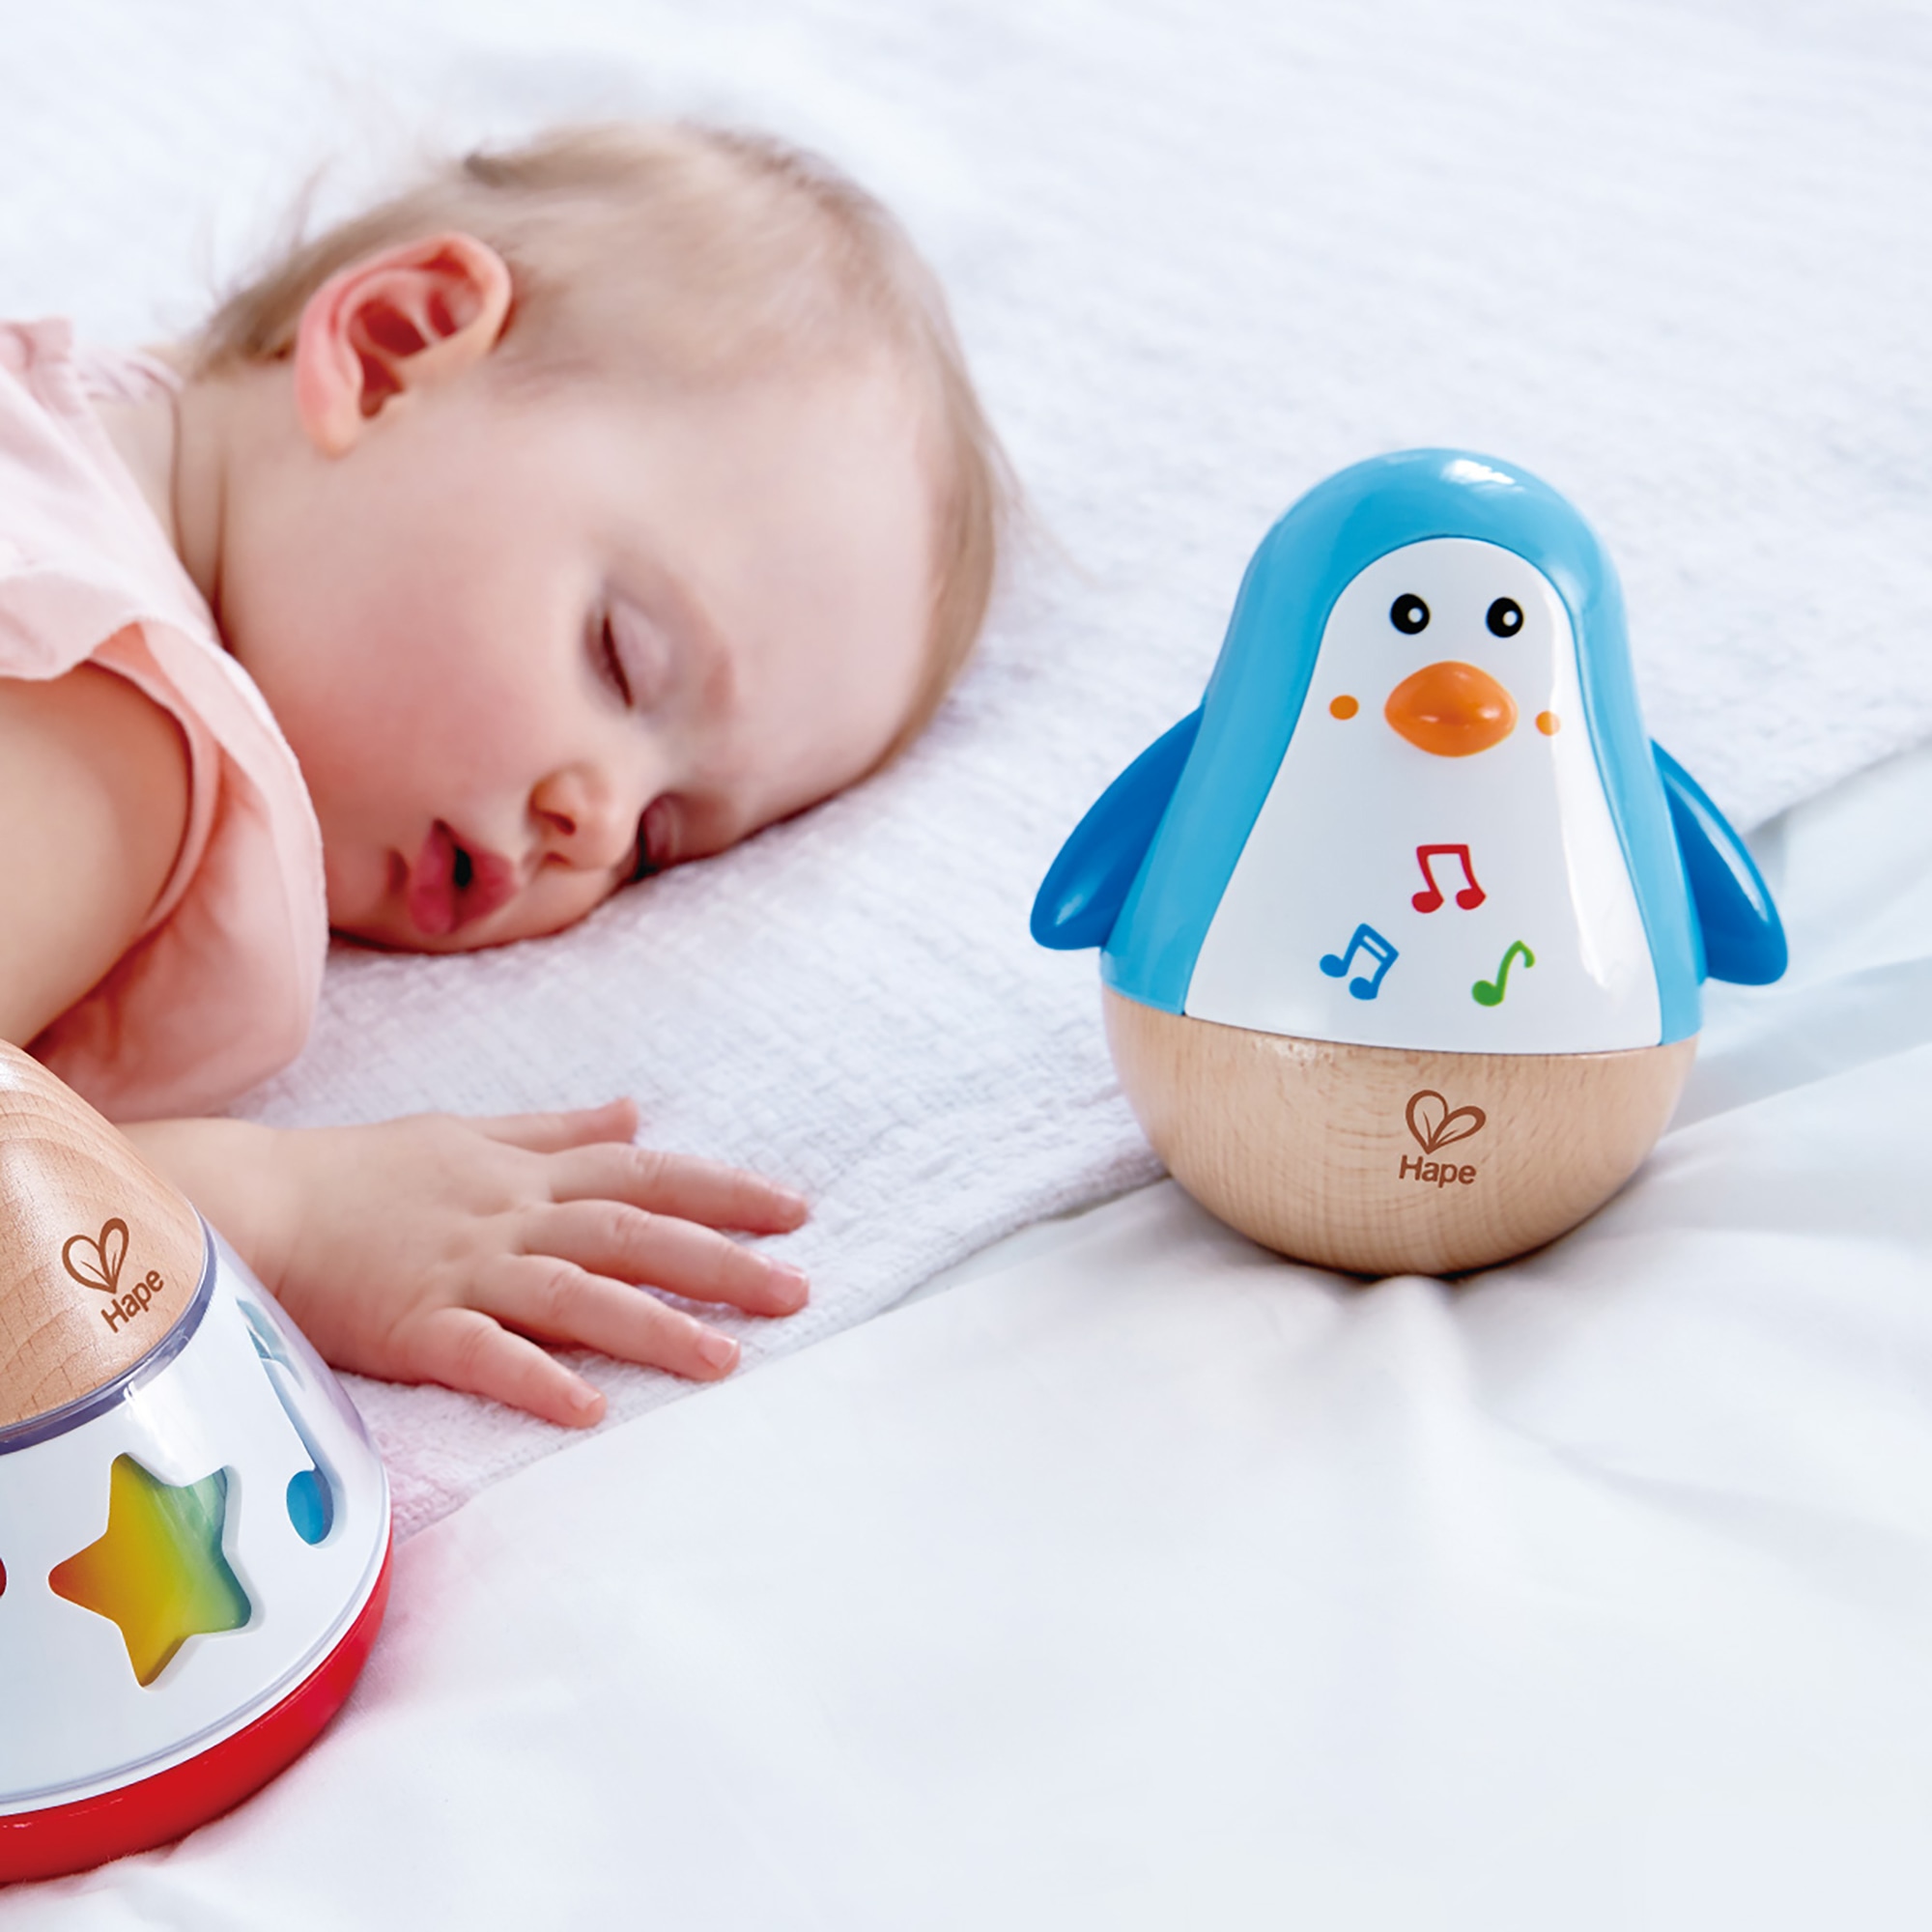 Hape: Penguin Musical Wobbler W/ Tinkling Sounds & Moving Arms As It Waddles - image 5 of 7